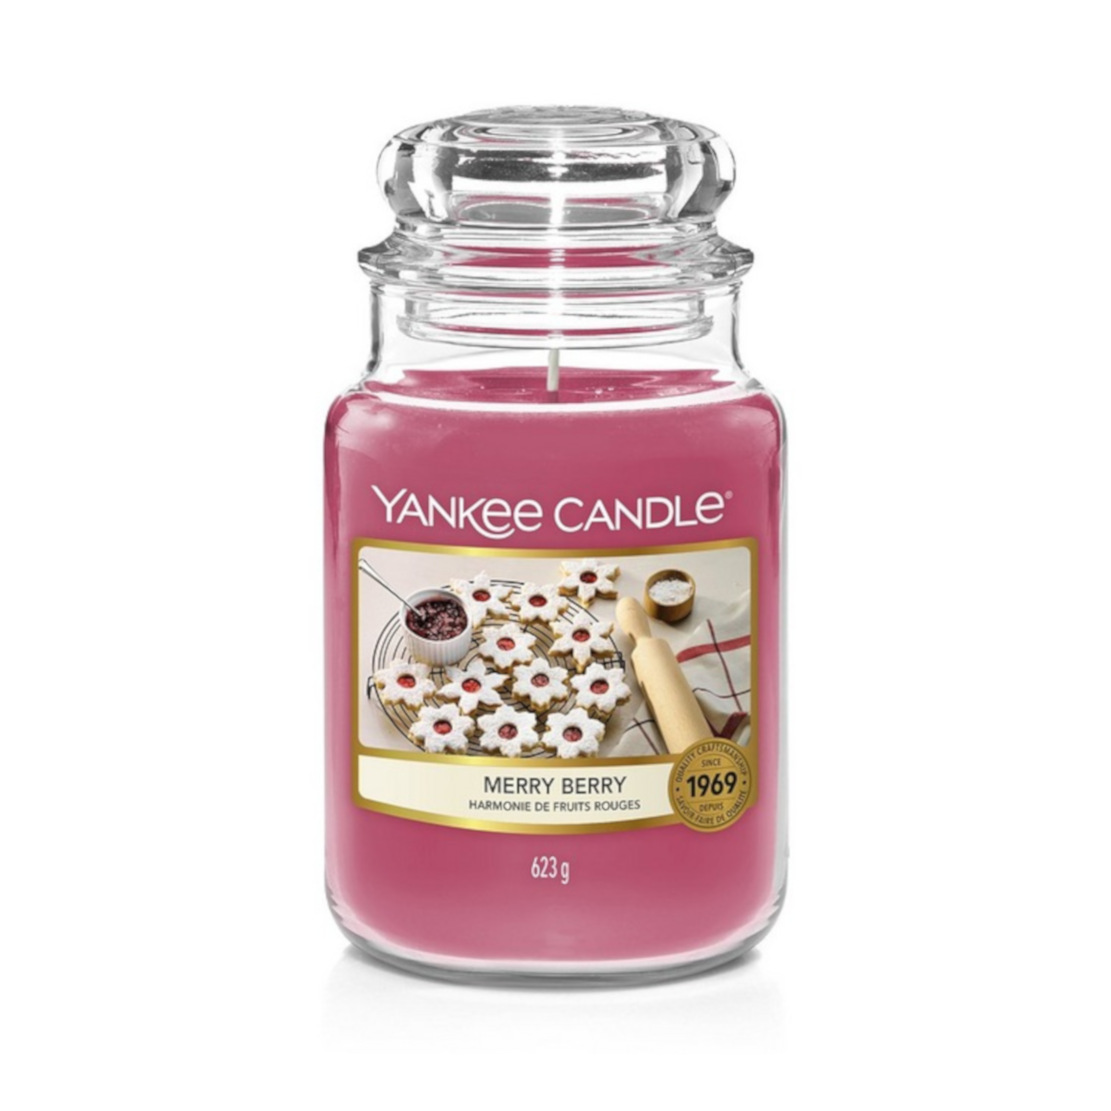 Yankee Candle Merry Berry Large Jar